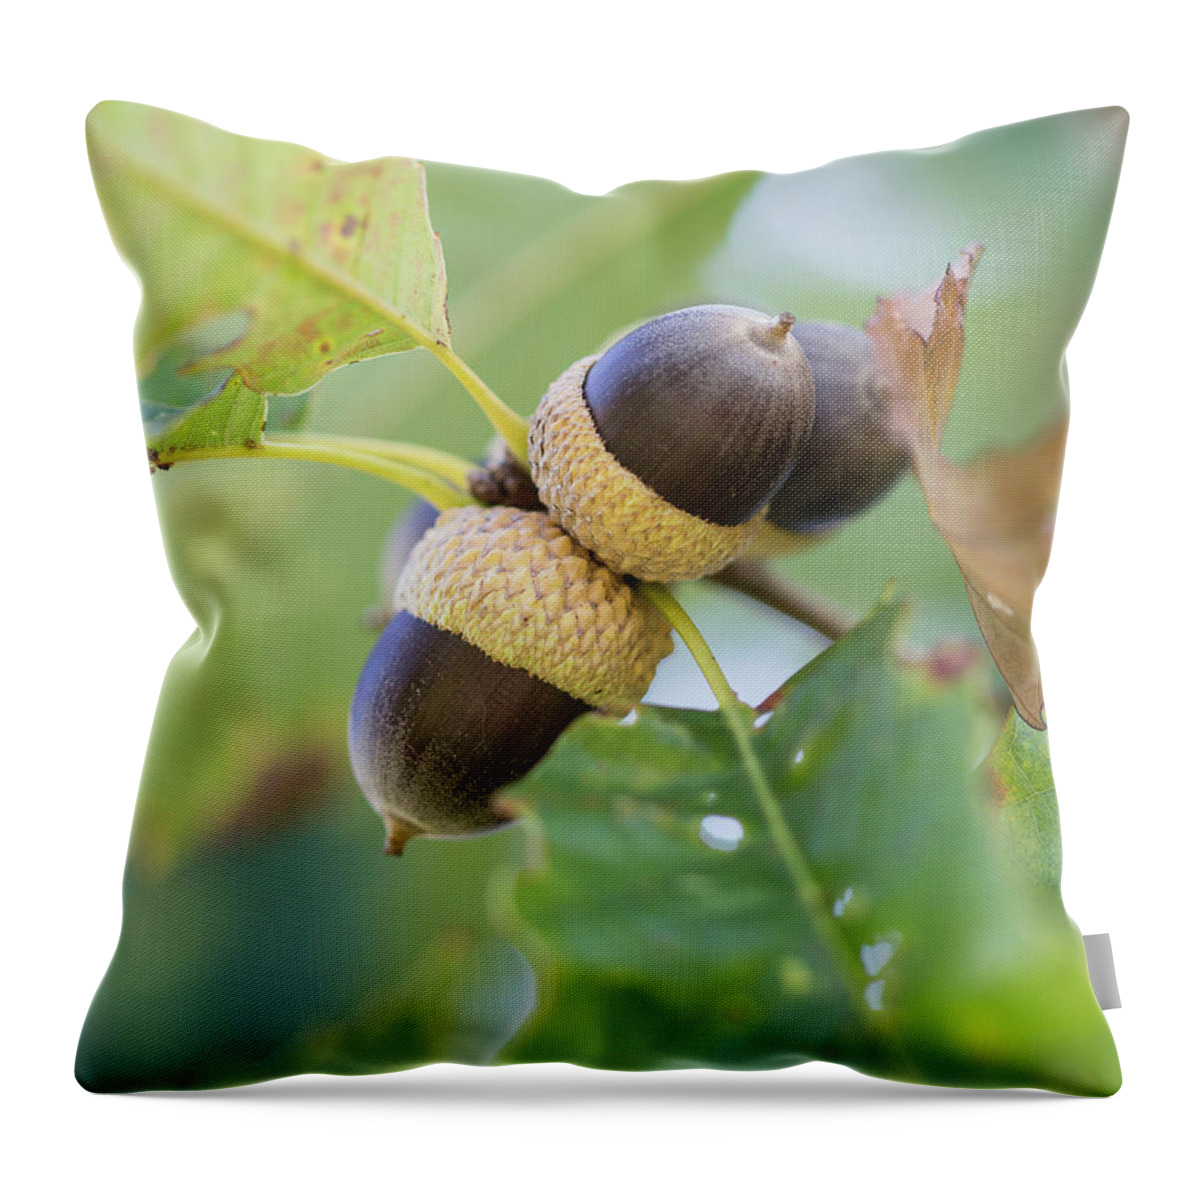 Acrons Throw Pillow featuring the photograph Acorns by David Beechum